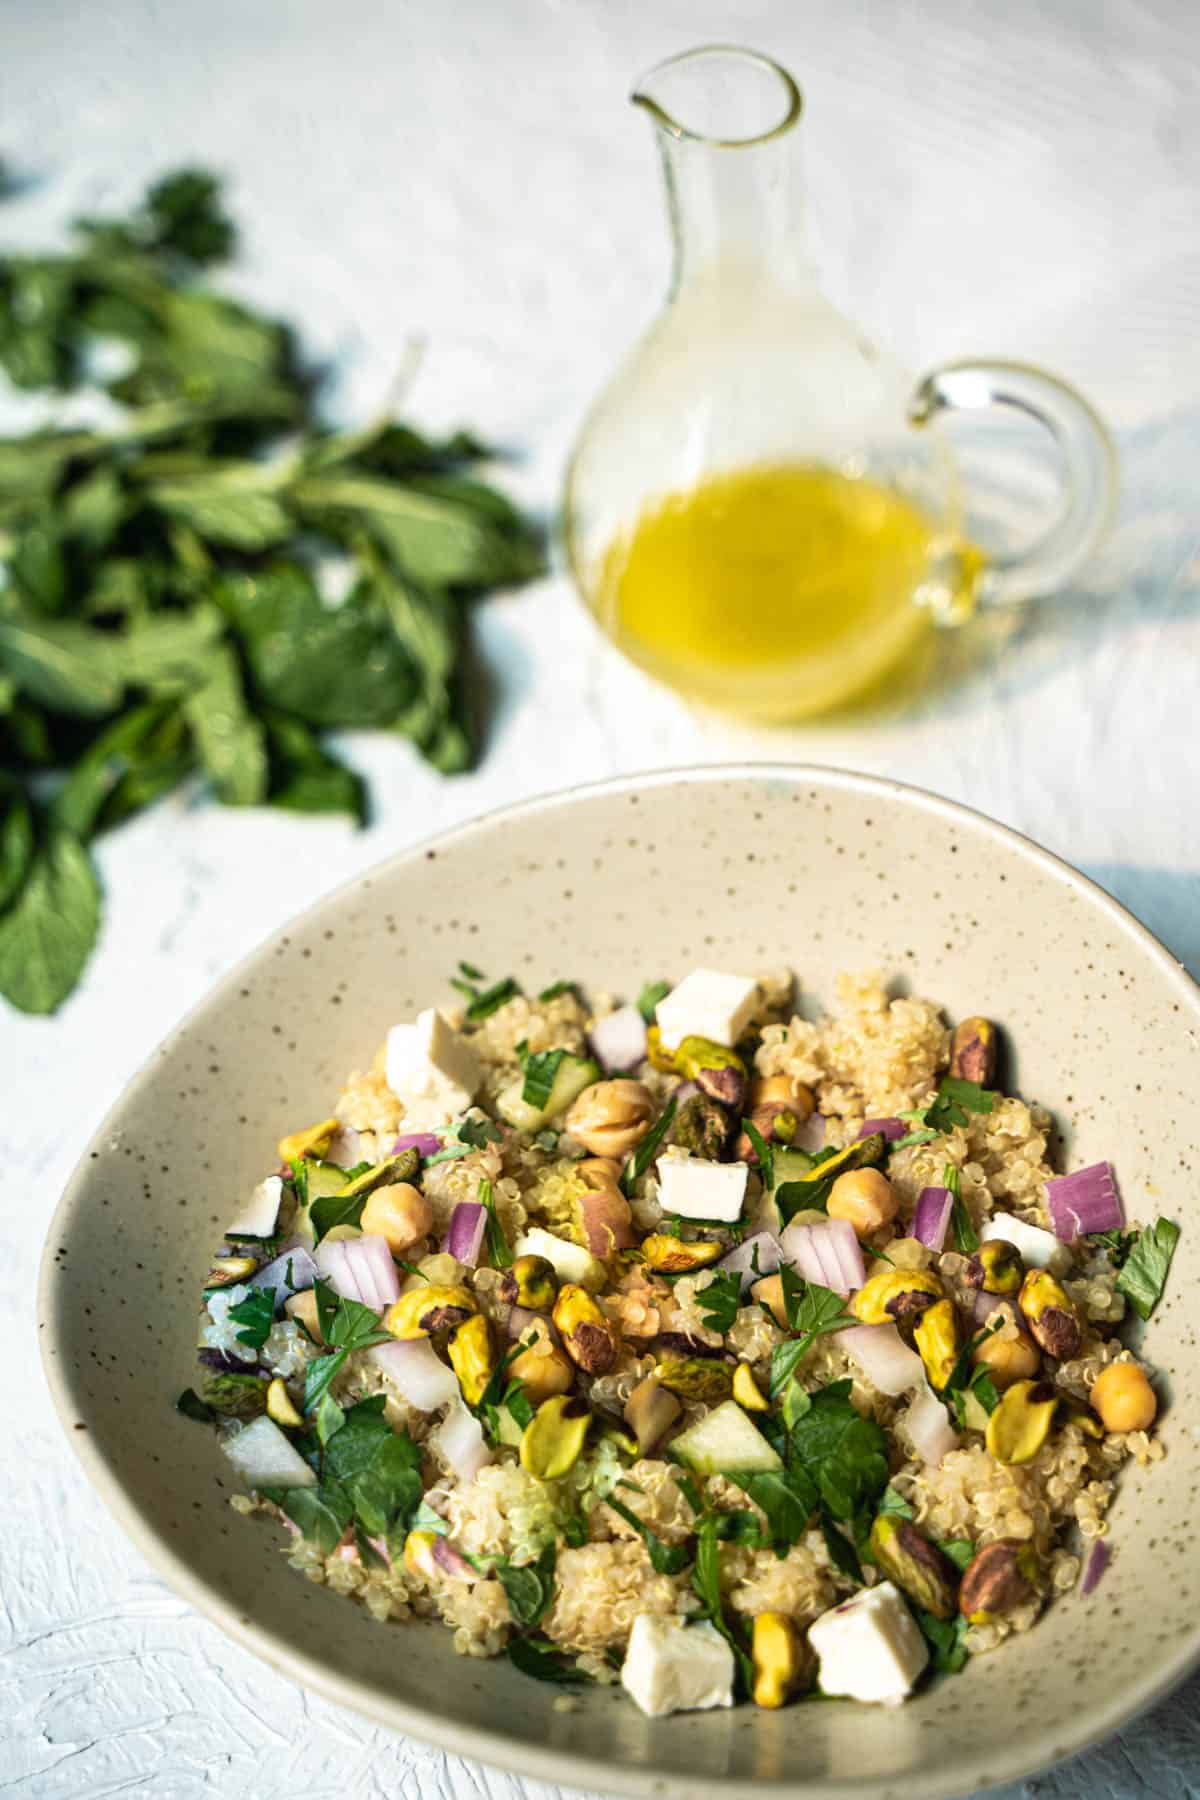 eniifer Aniston Salad Recipe made of quinoa,cucumber, fresh herbs, pistachios, chickpeas and feta cheese all tossed in a simple lemon and olive oil dressing in a green oval bowl on a white table with mint and olive oil bottle sitting next to the bowl